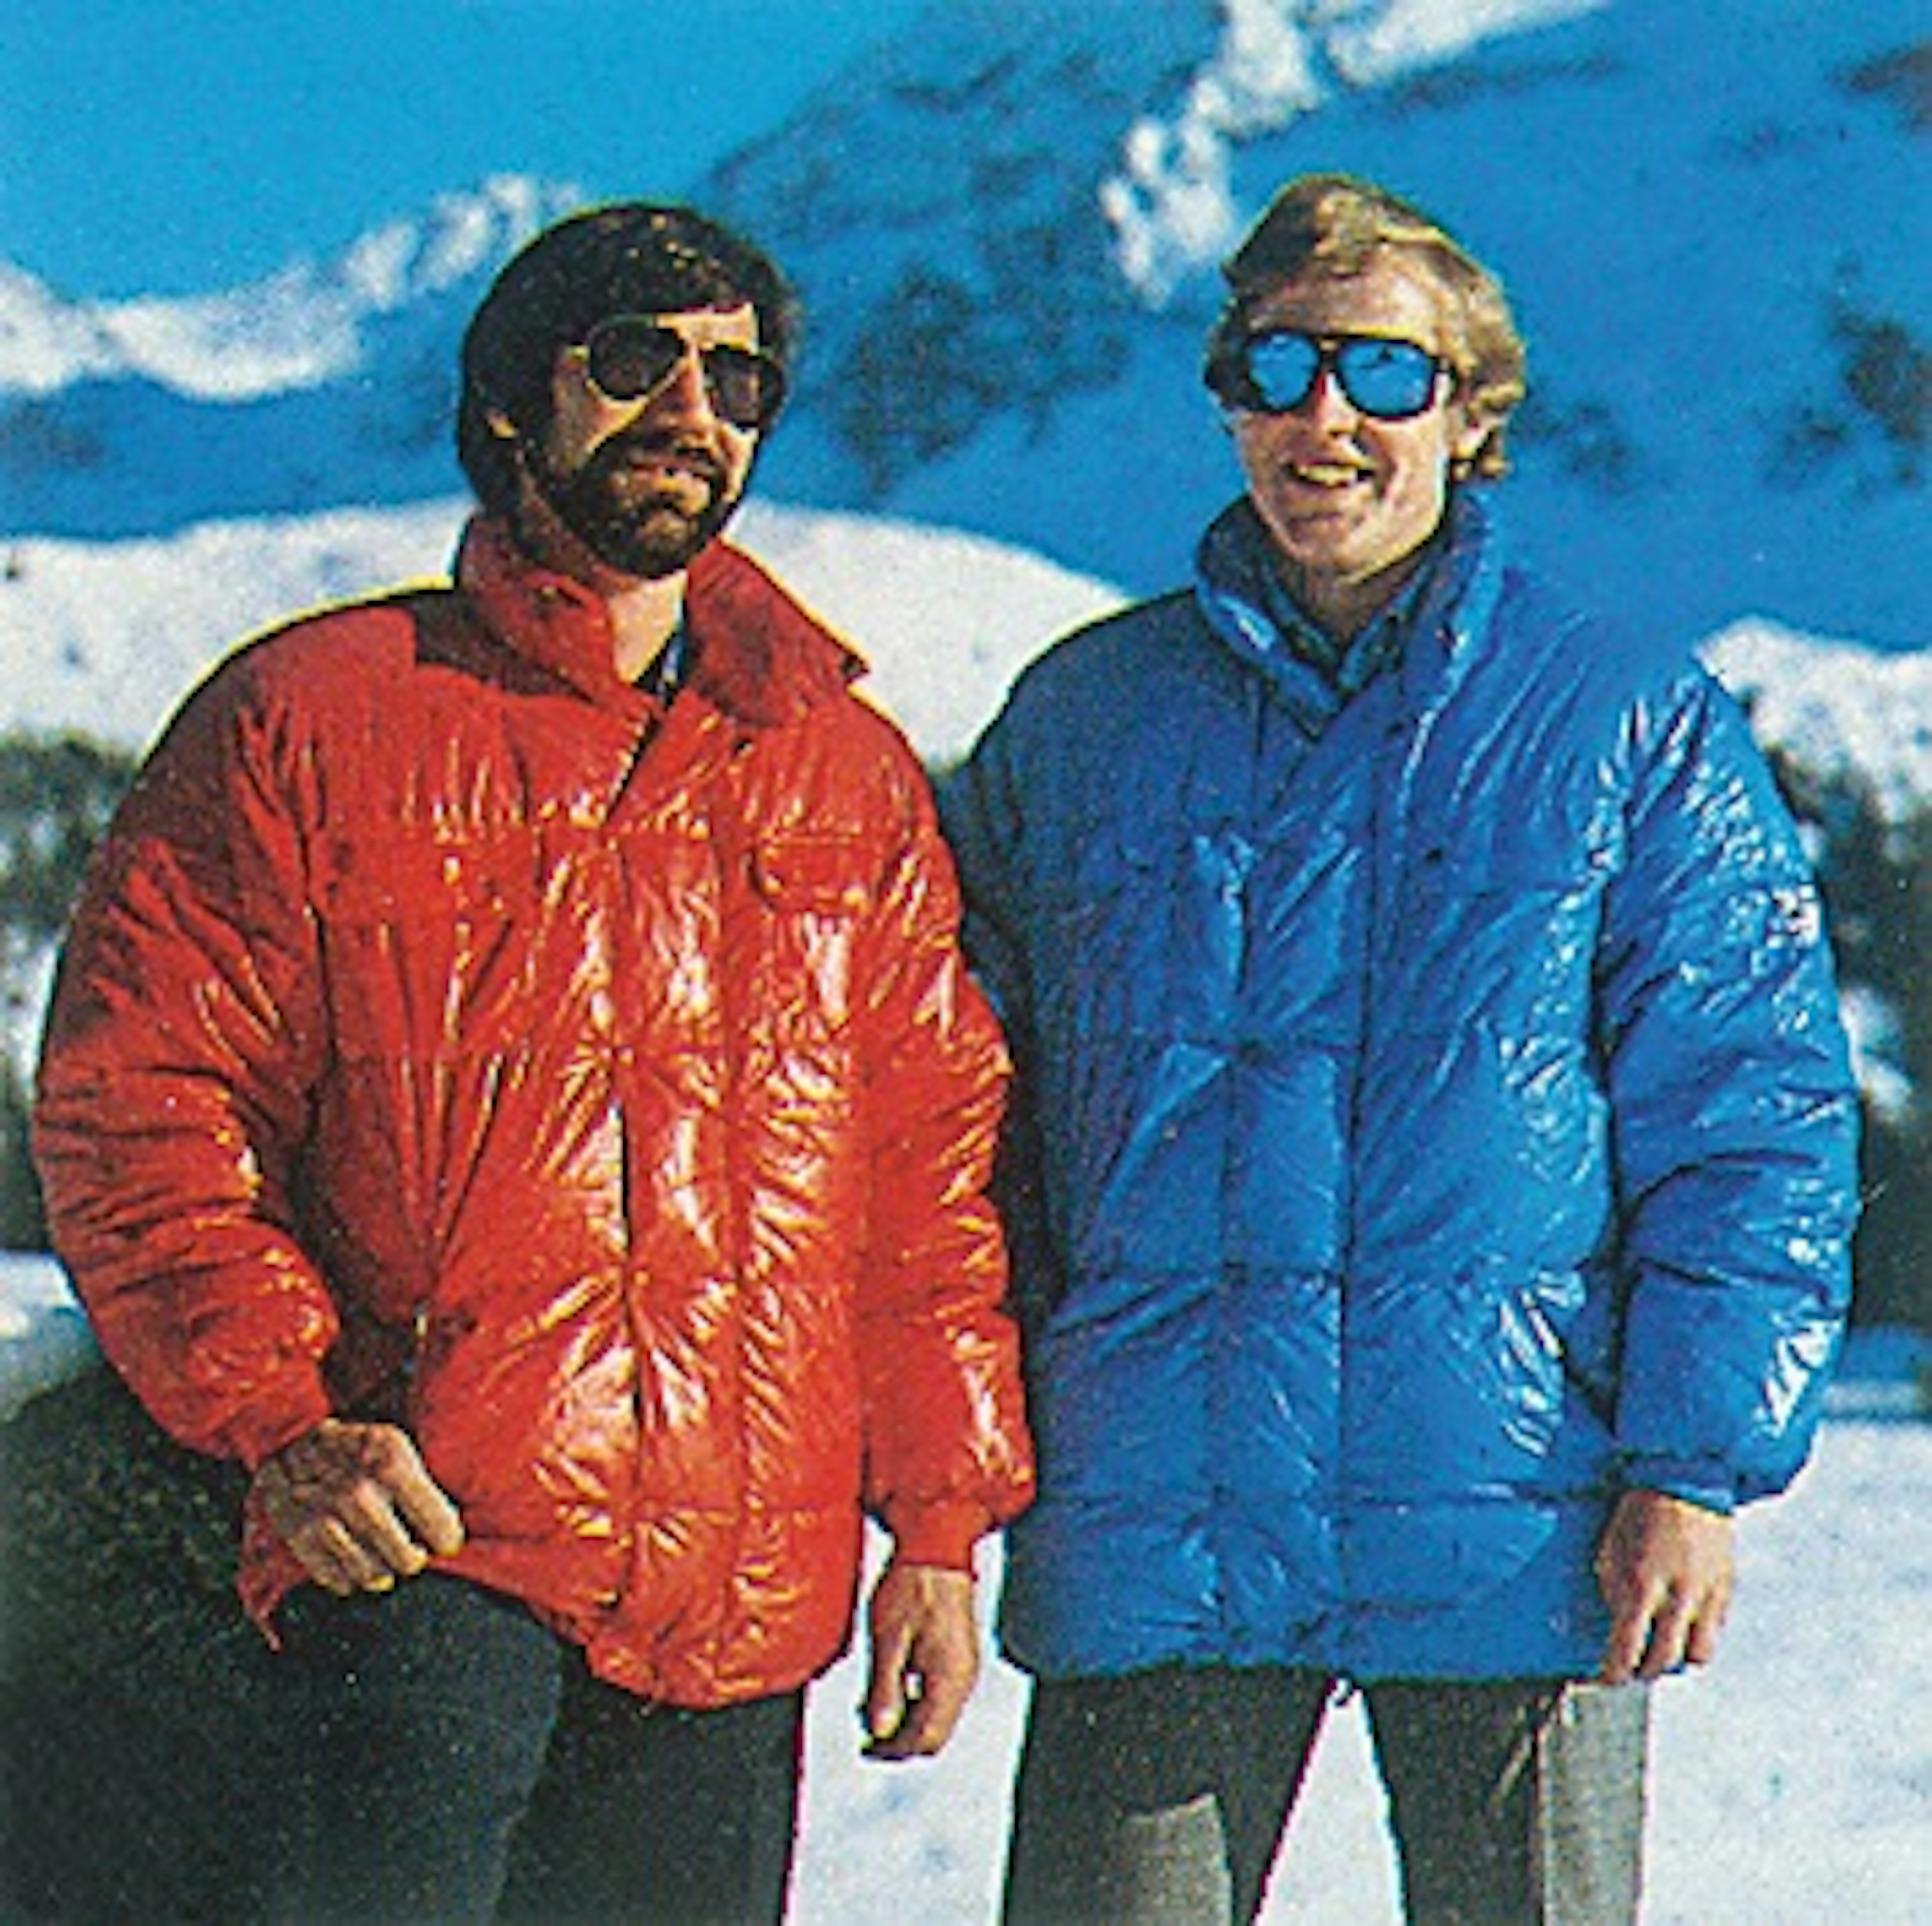 Mammut jackets from the past in blue and red